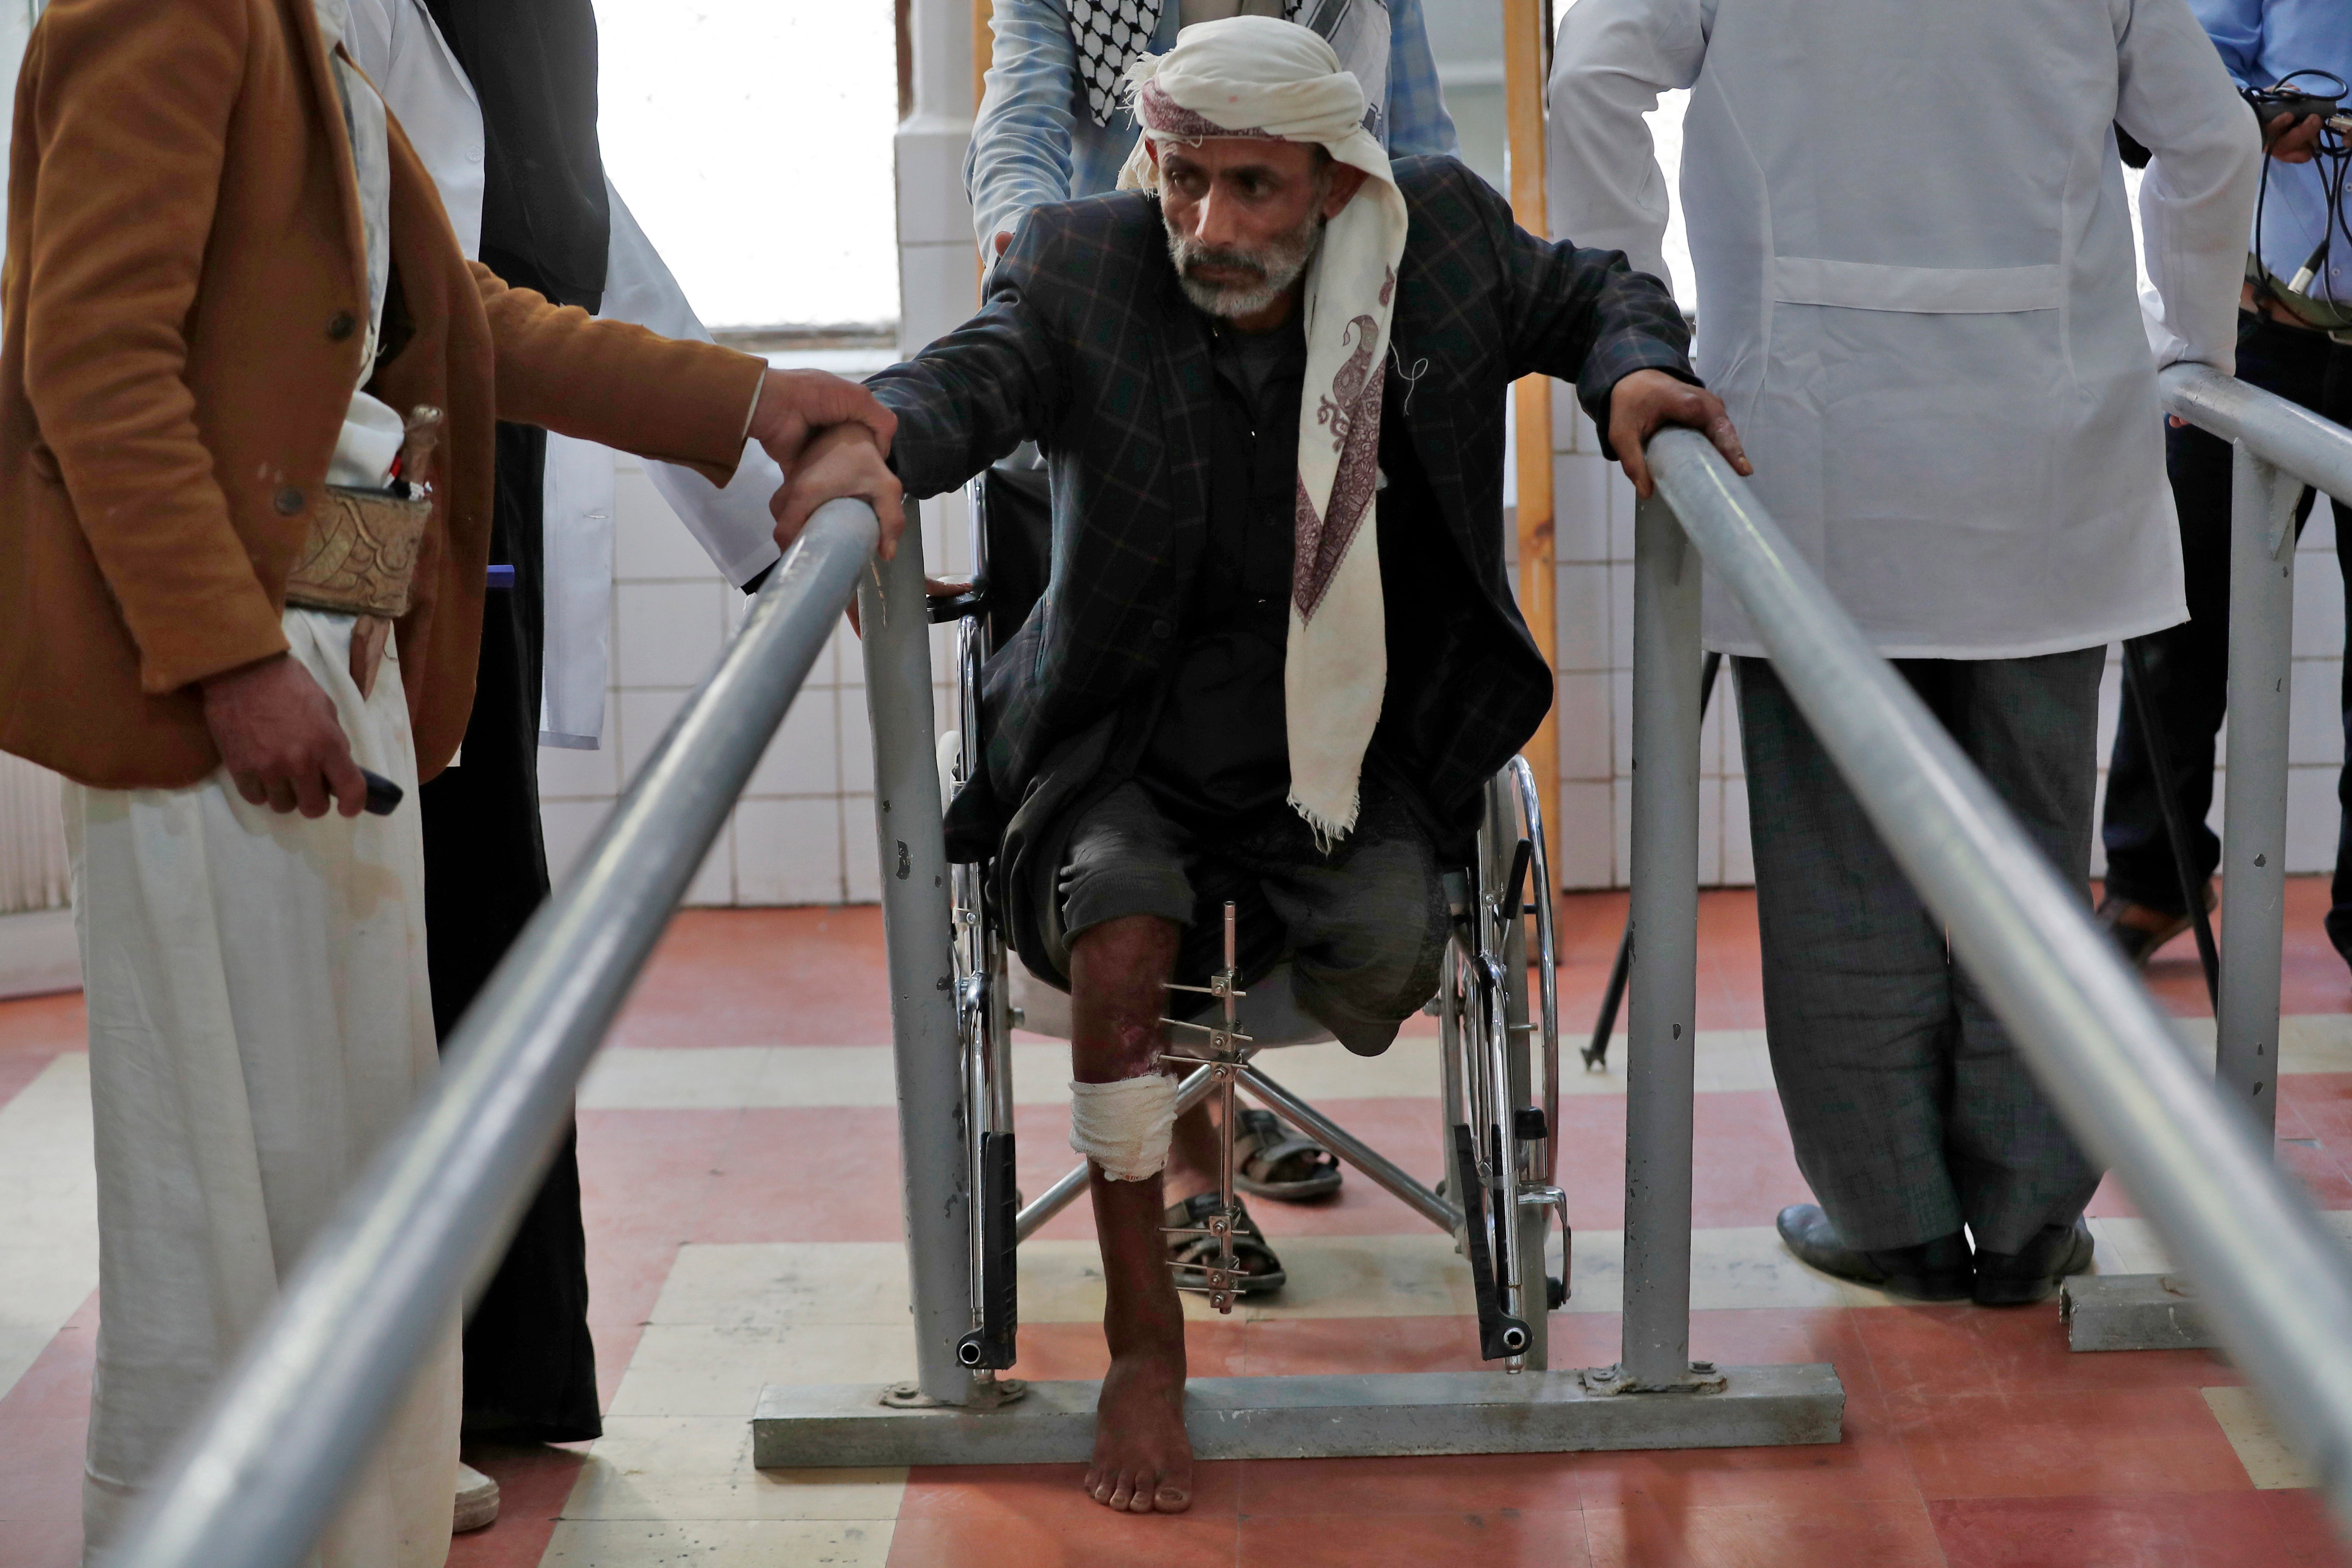 A disabled Yemeni, a victim of the ongoing conflict, tries to stand up as he waits to try out a prosthetic limb at a rehabilitation center in Sana’a